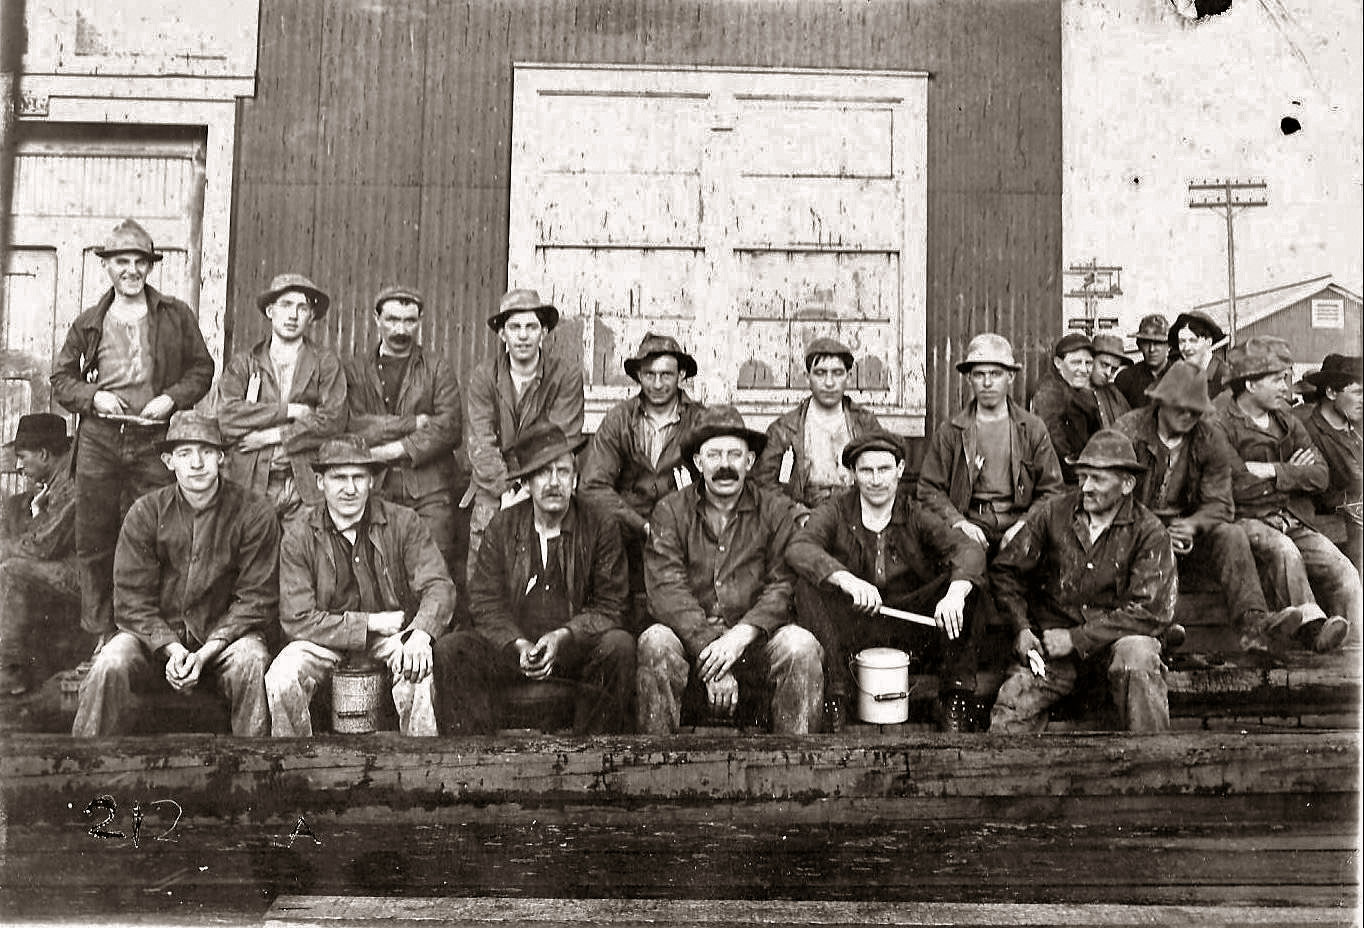 My Grandfather (front row 2nd from the left with lunch pail) was a German immigrant who came to NYC and later traveled across the country. He worked as a copper miner among other jobs. View full size.